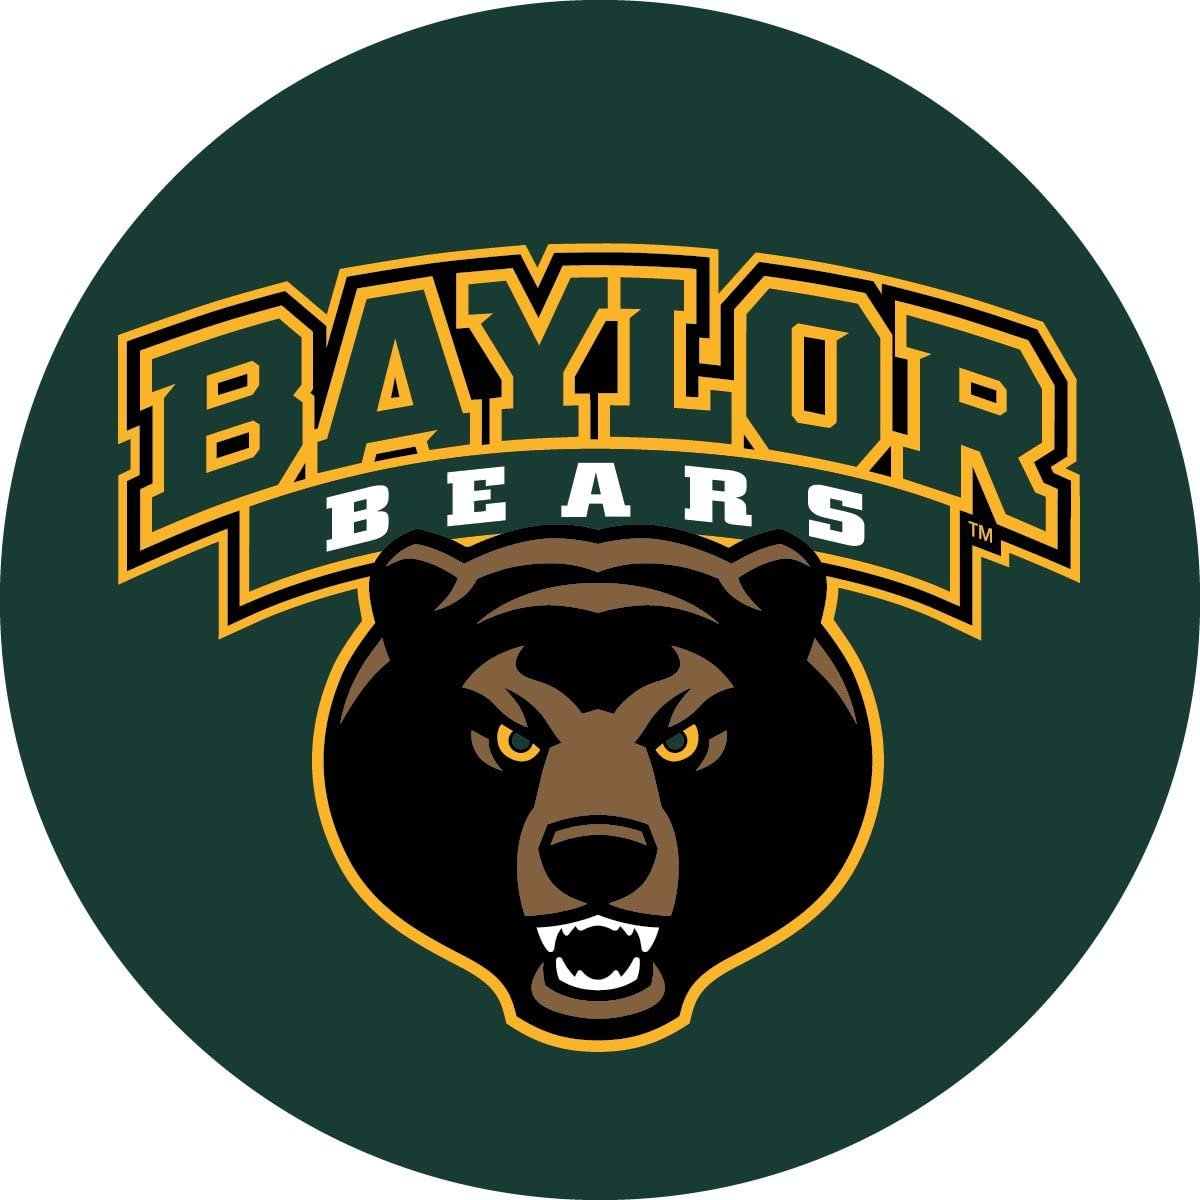 Baylor Bears RR 4" Round Vinyl Decal Auto Home University of